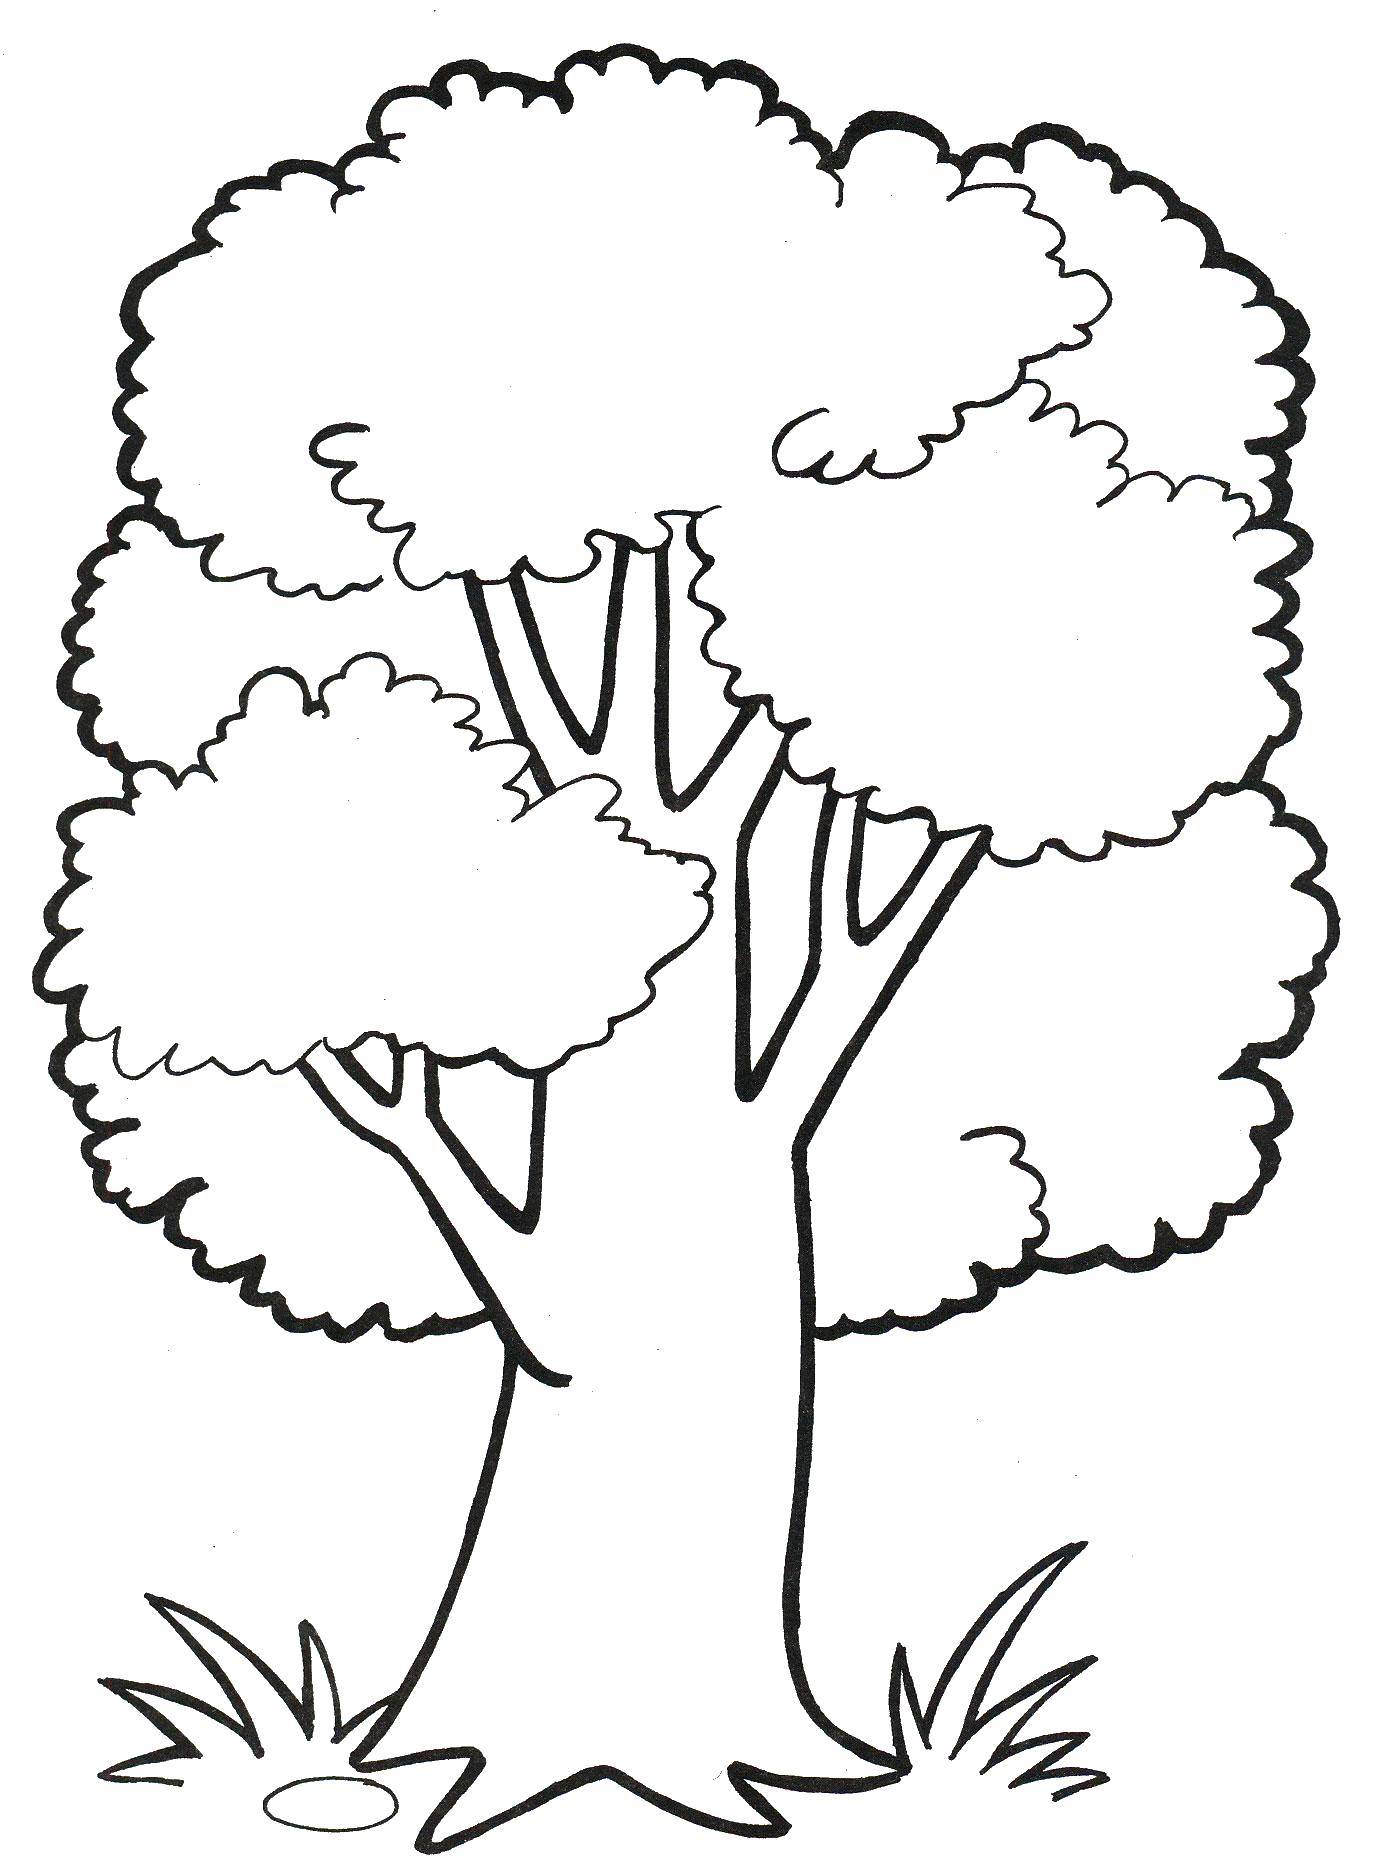 Coloring Big tree. Category The plant. Tags:  plants, tree, nature.